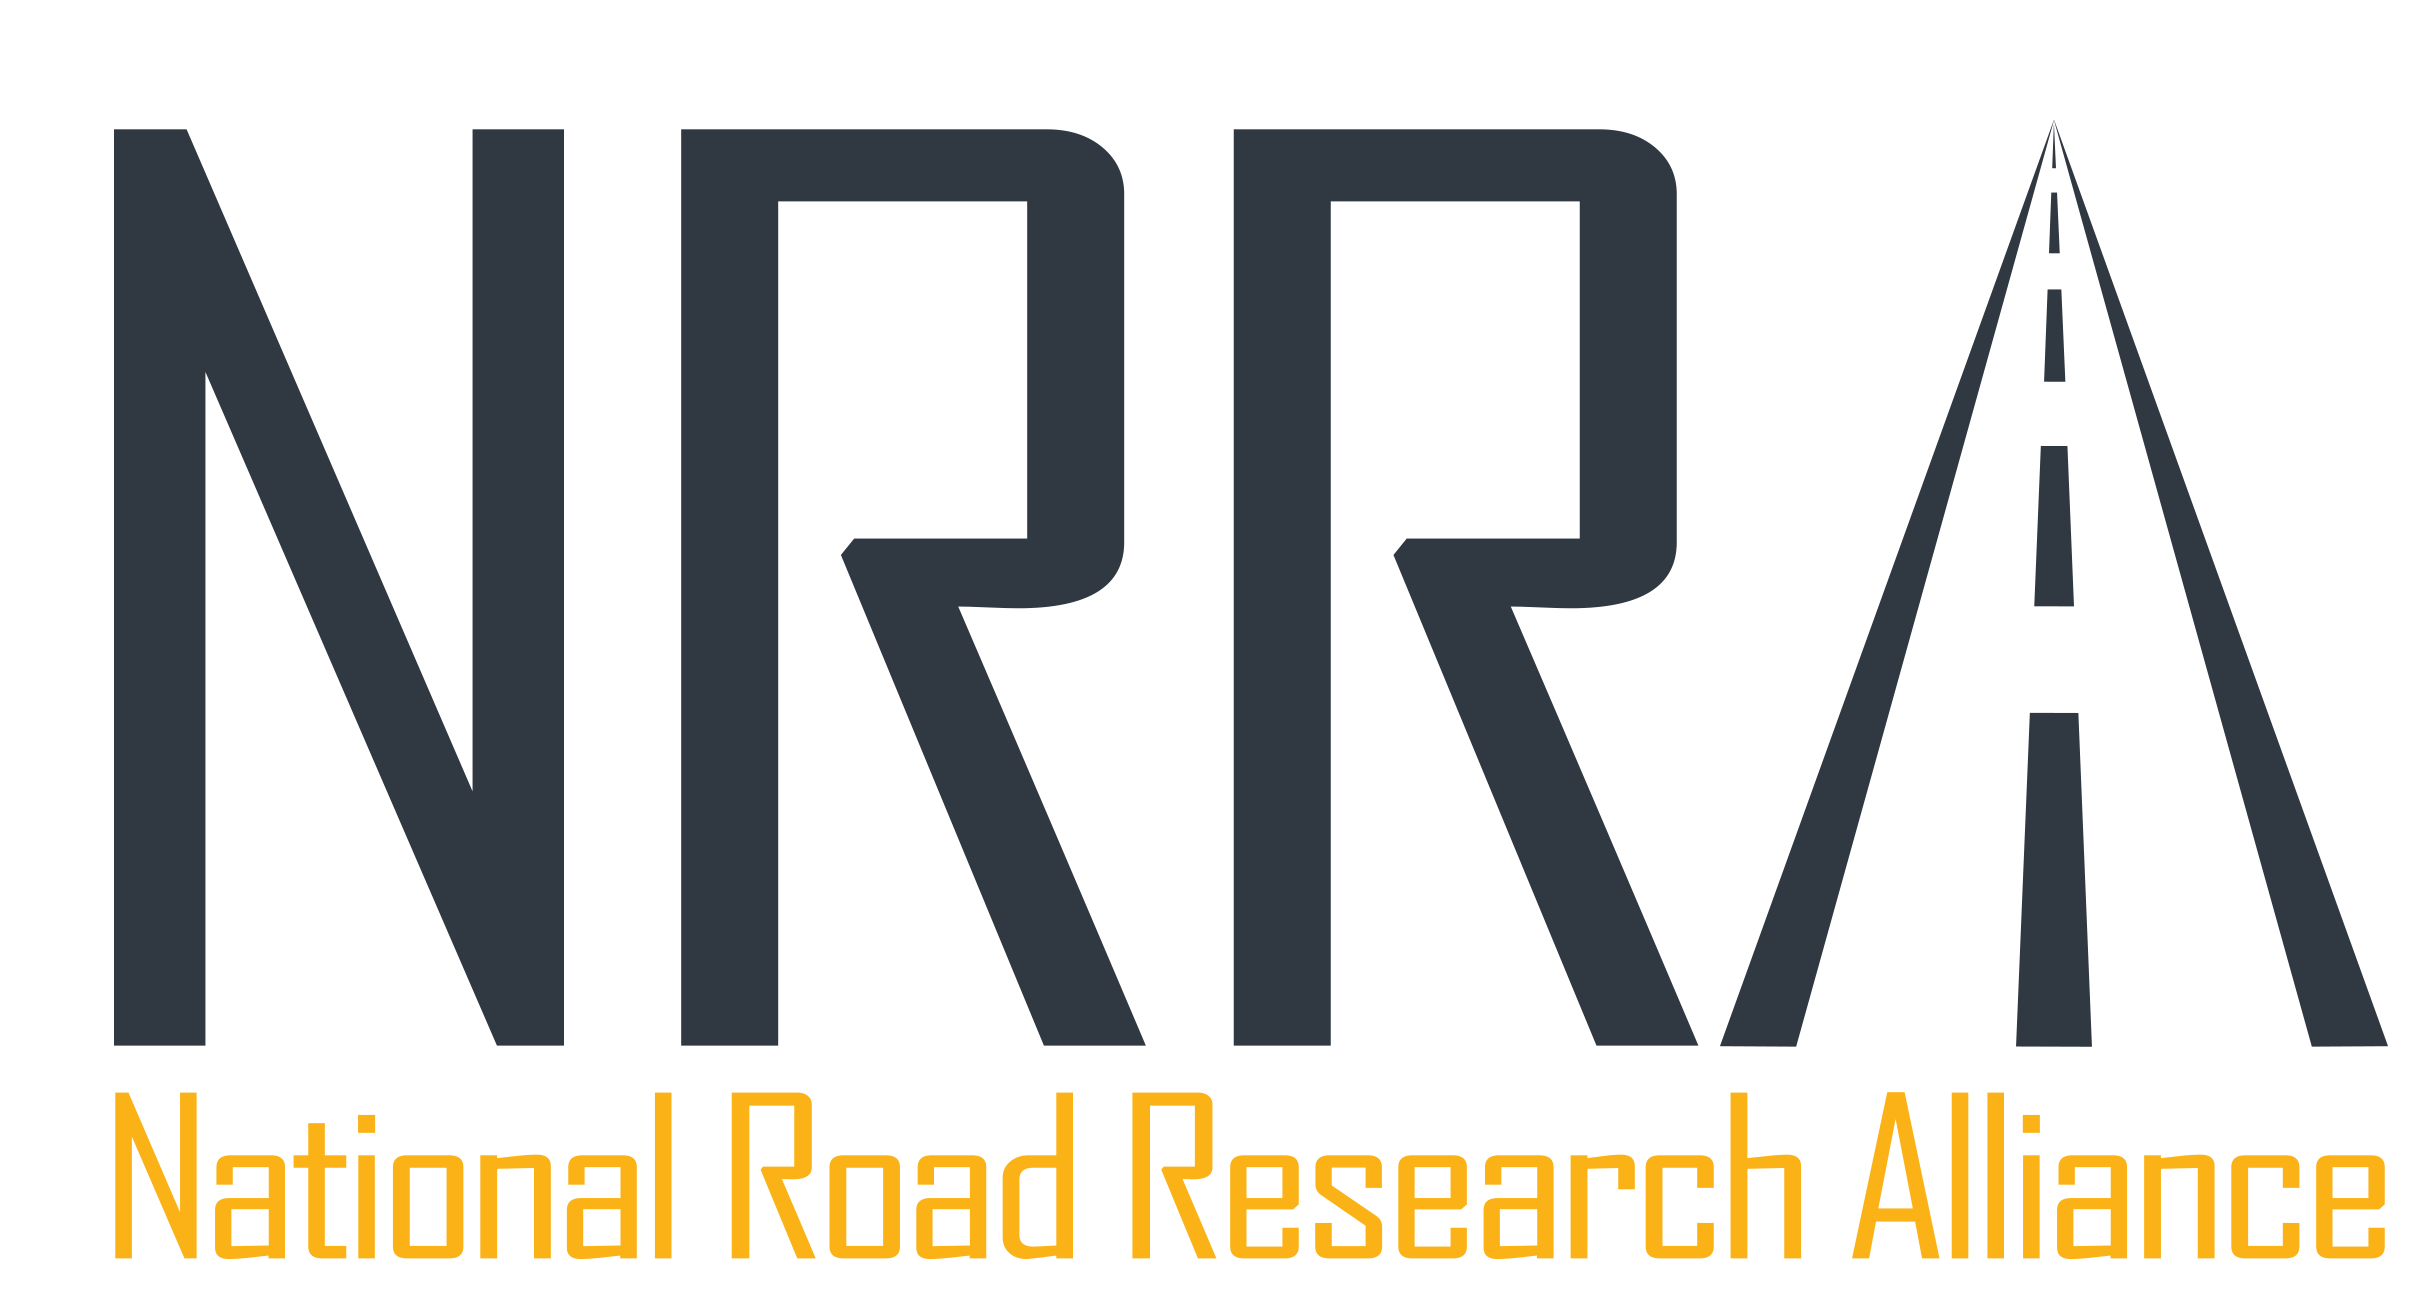 National Road Research Alliance Logo